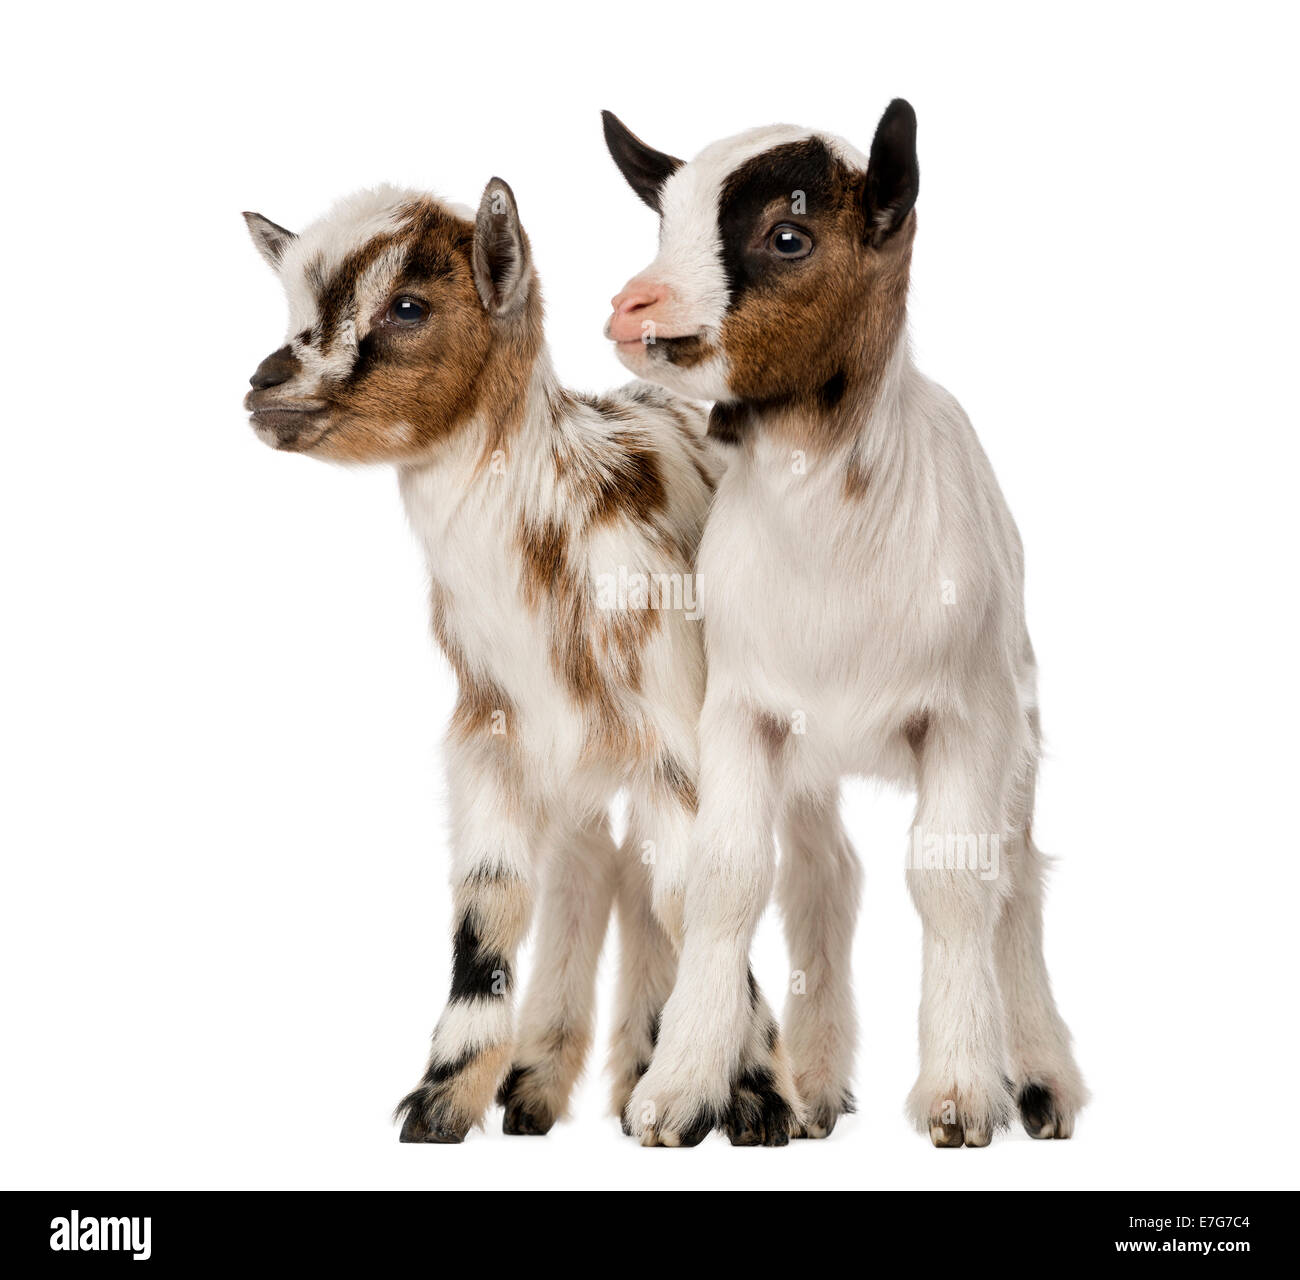 Two Young domestic goats, kids against white background Stock Photo